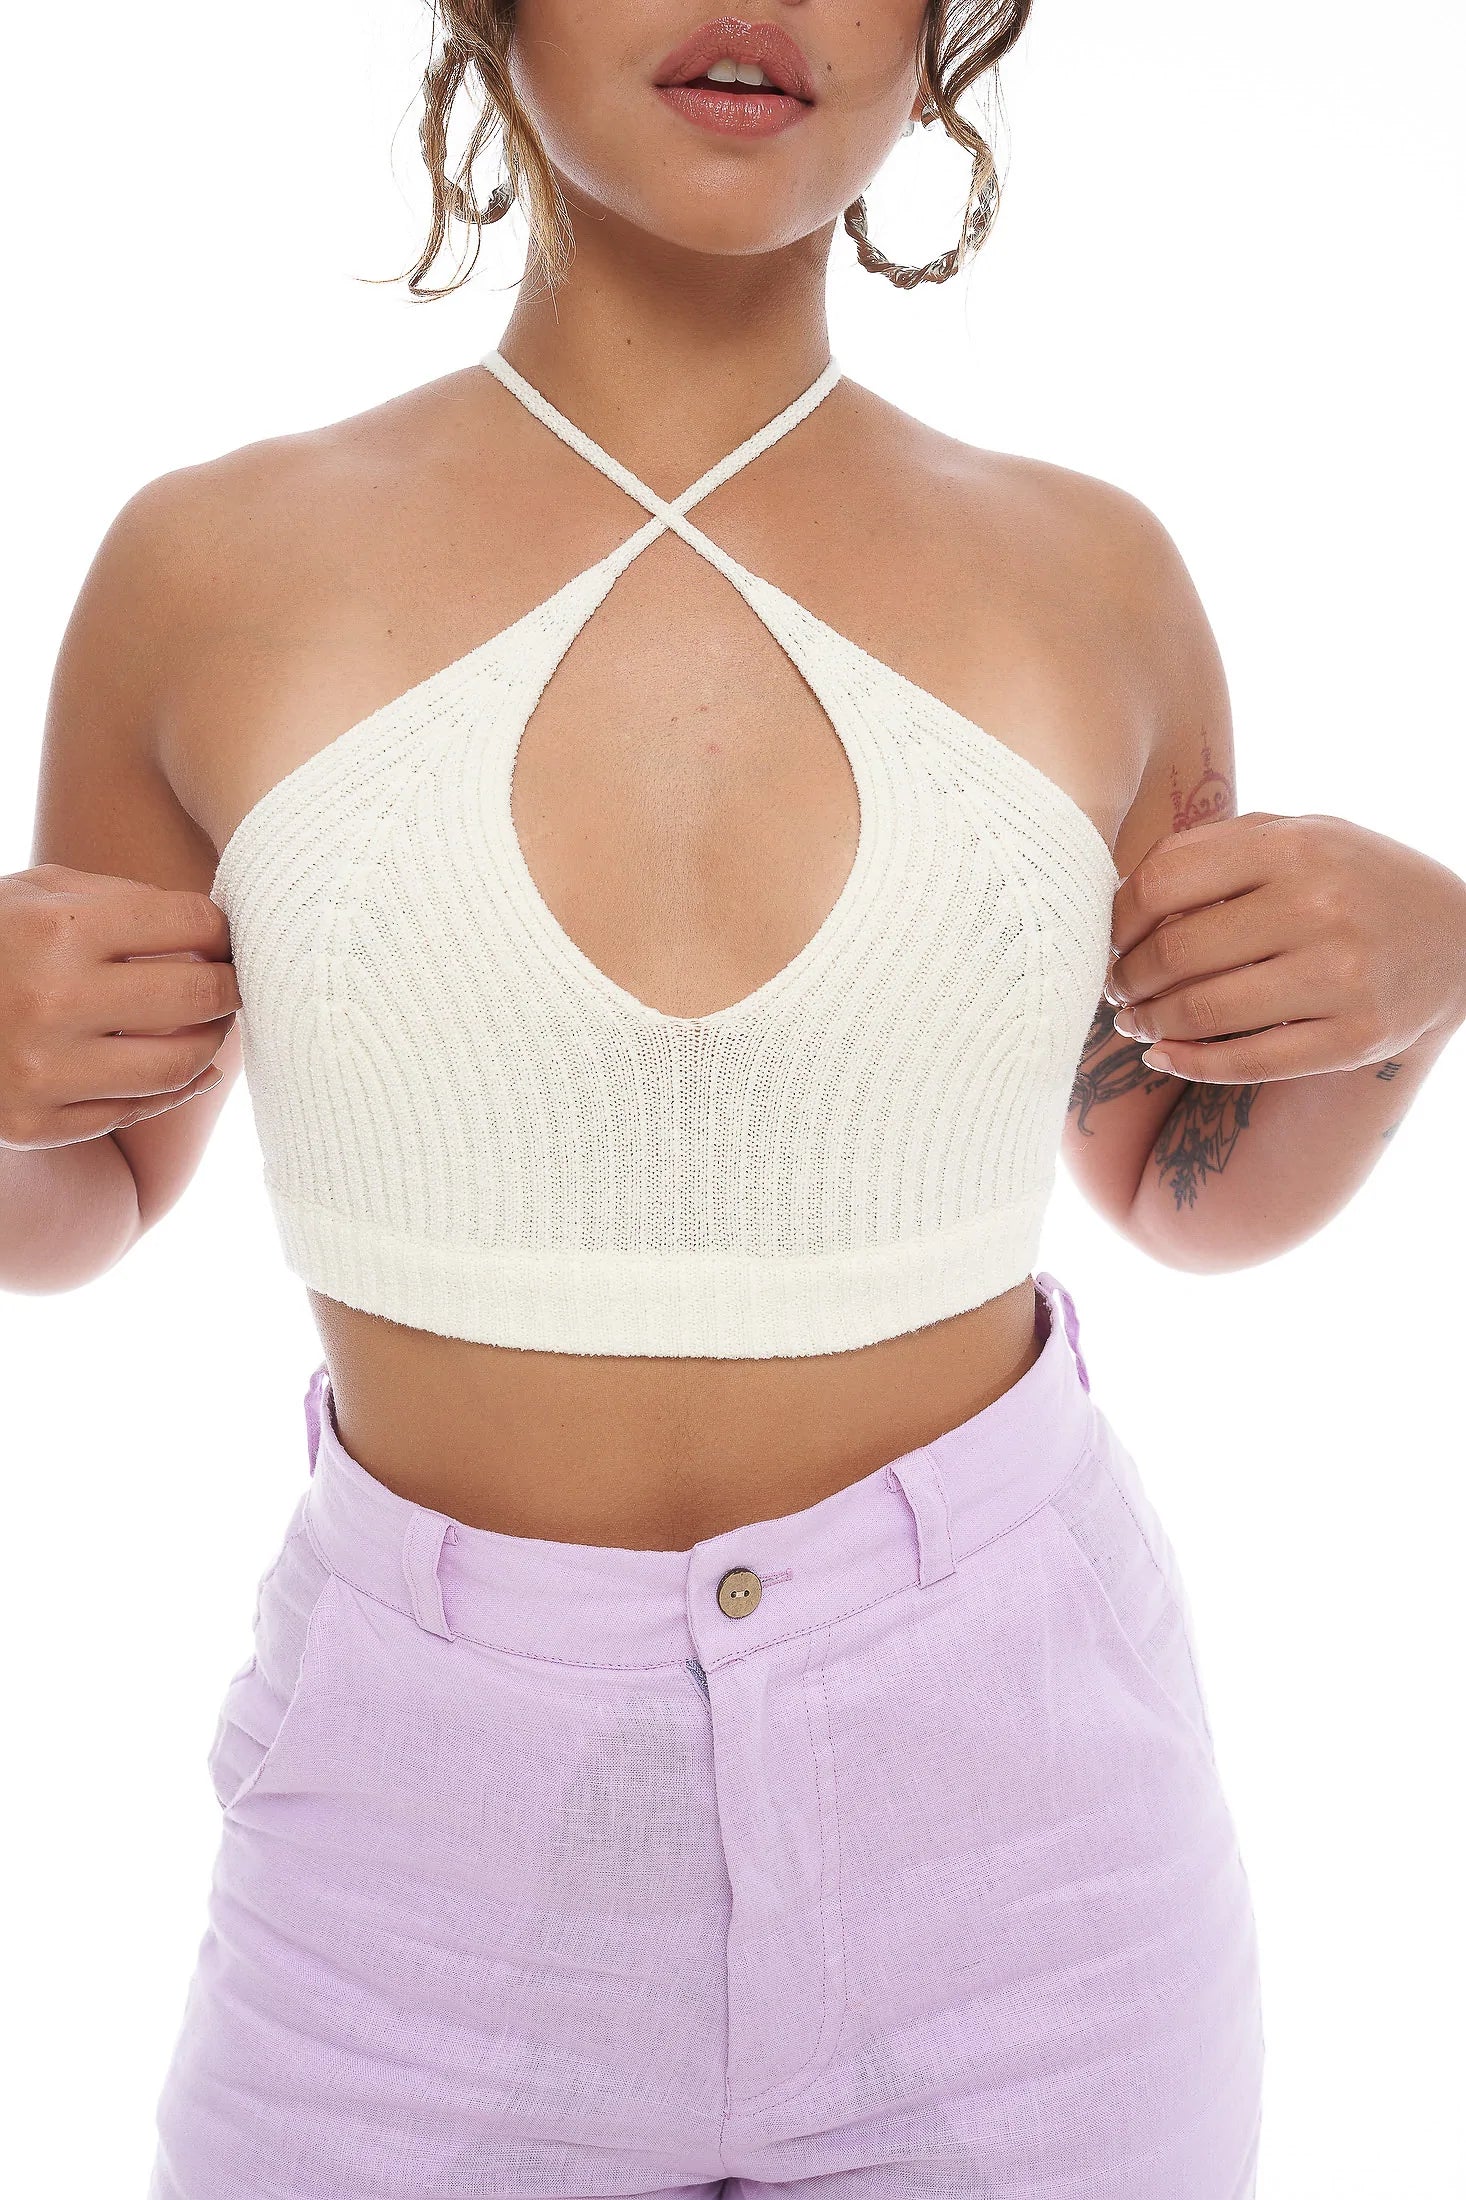 LOST IN NOWHERE / BLOSSOM BRALETTE